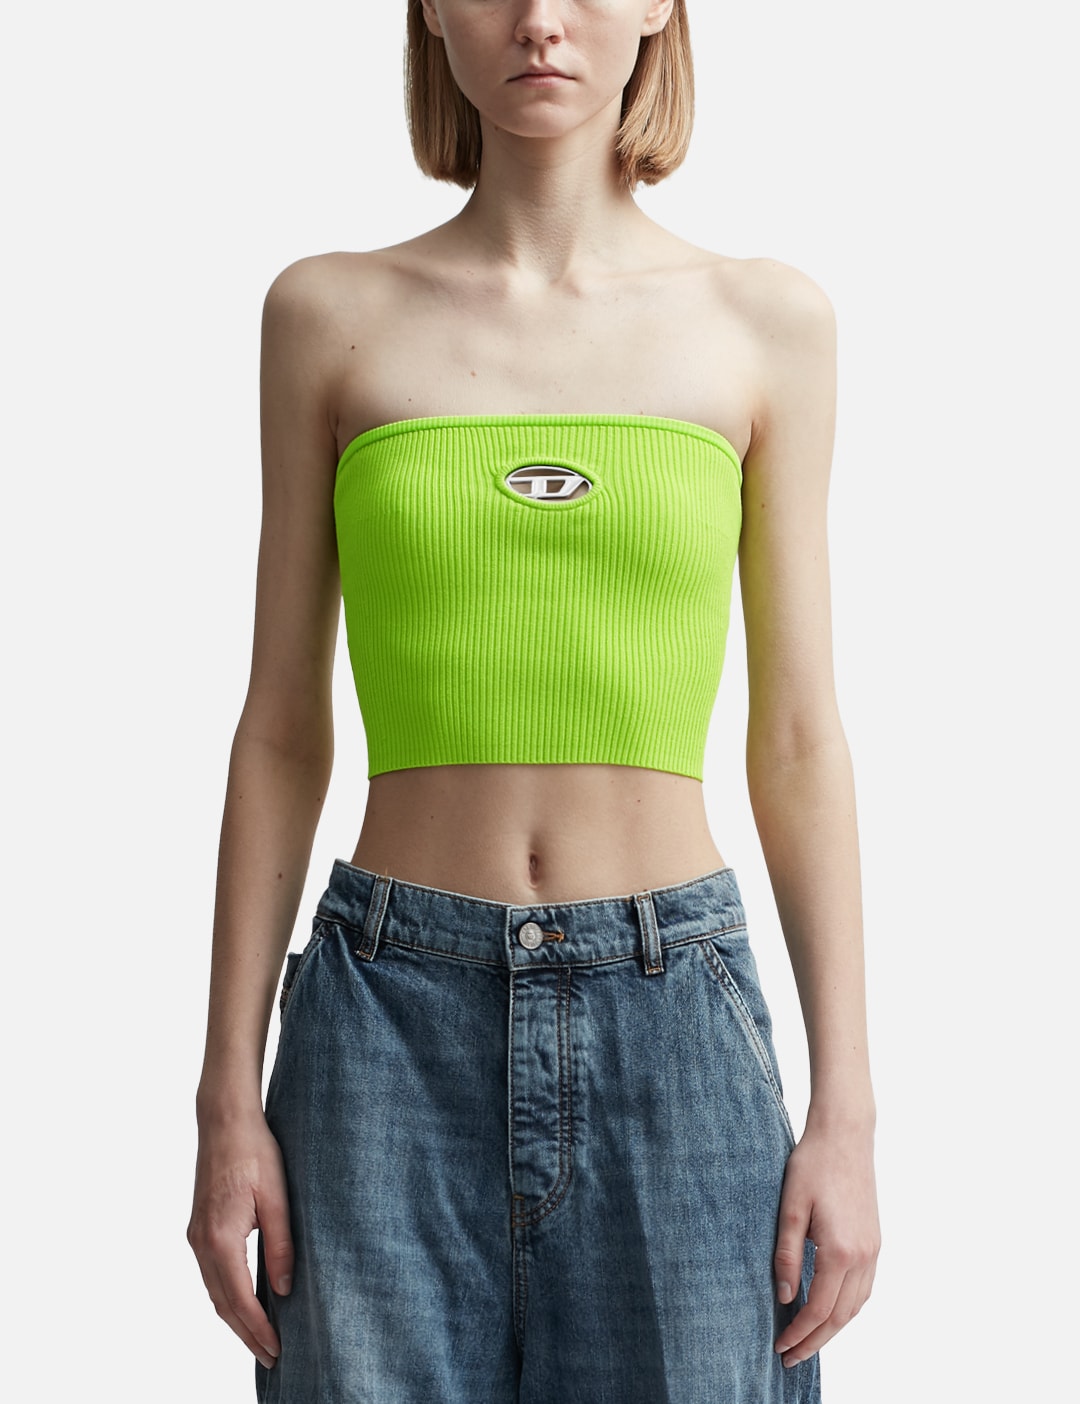 Misbhv - Sport Halter Bra Top  HBX - Globally Curated Fashion and